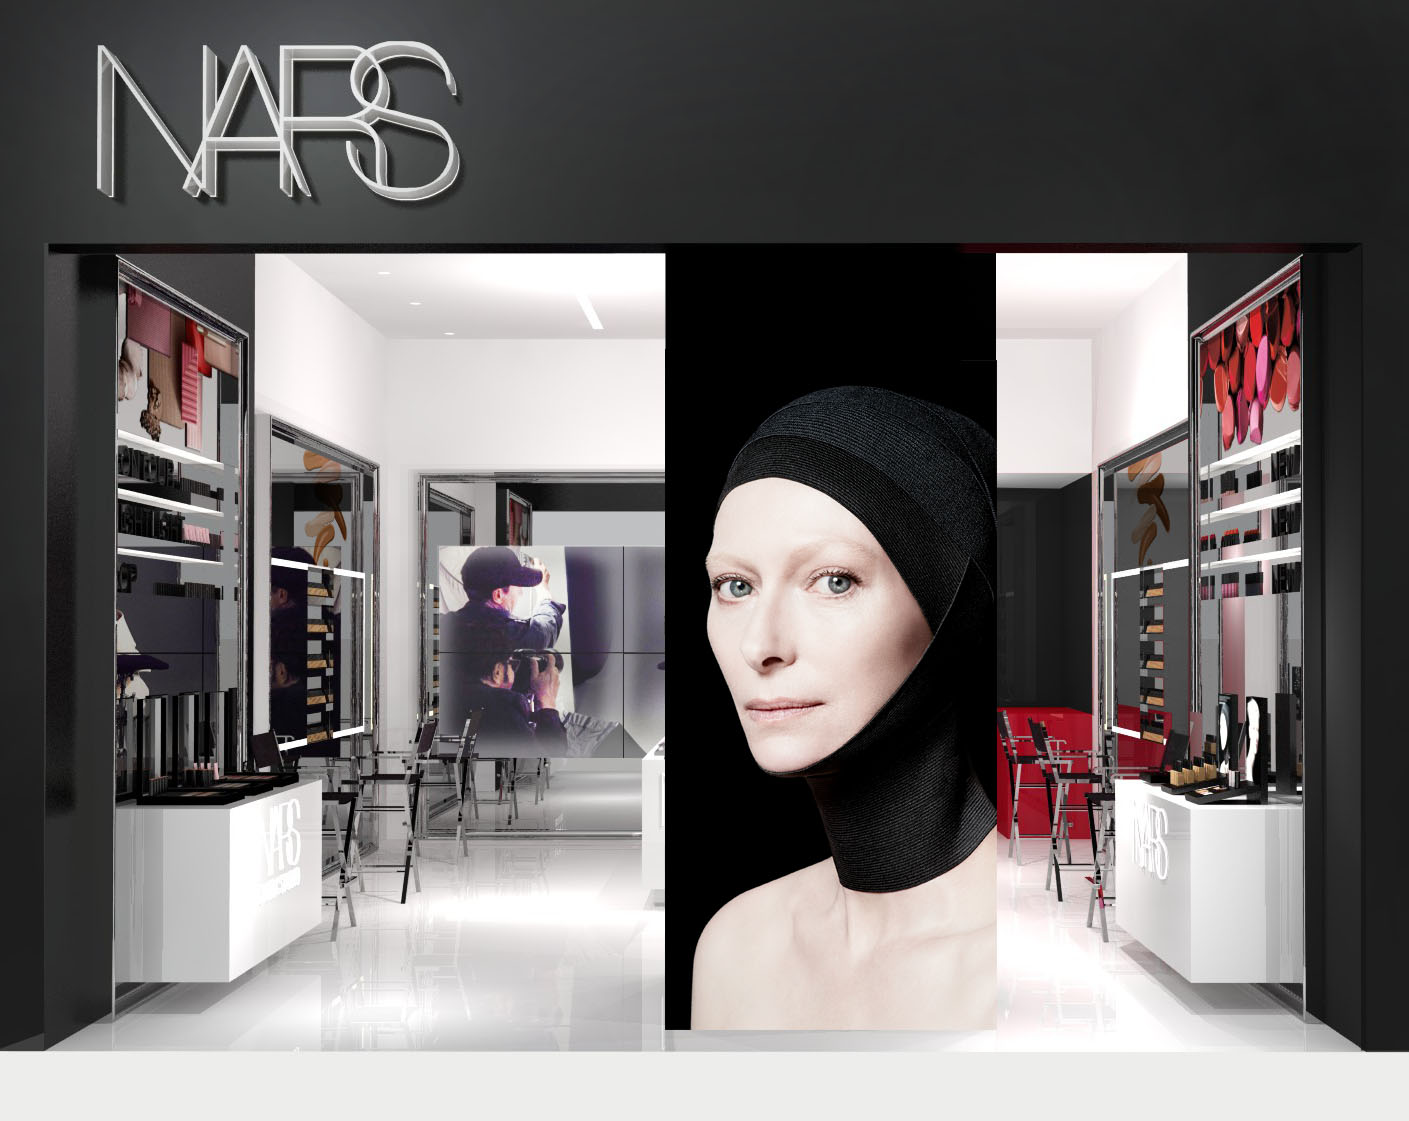 Introducing NARS Garden State Plaza Boutique